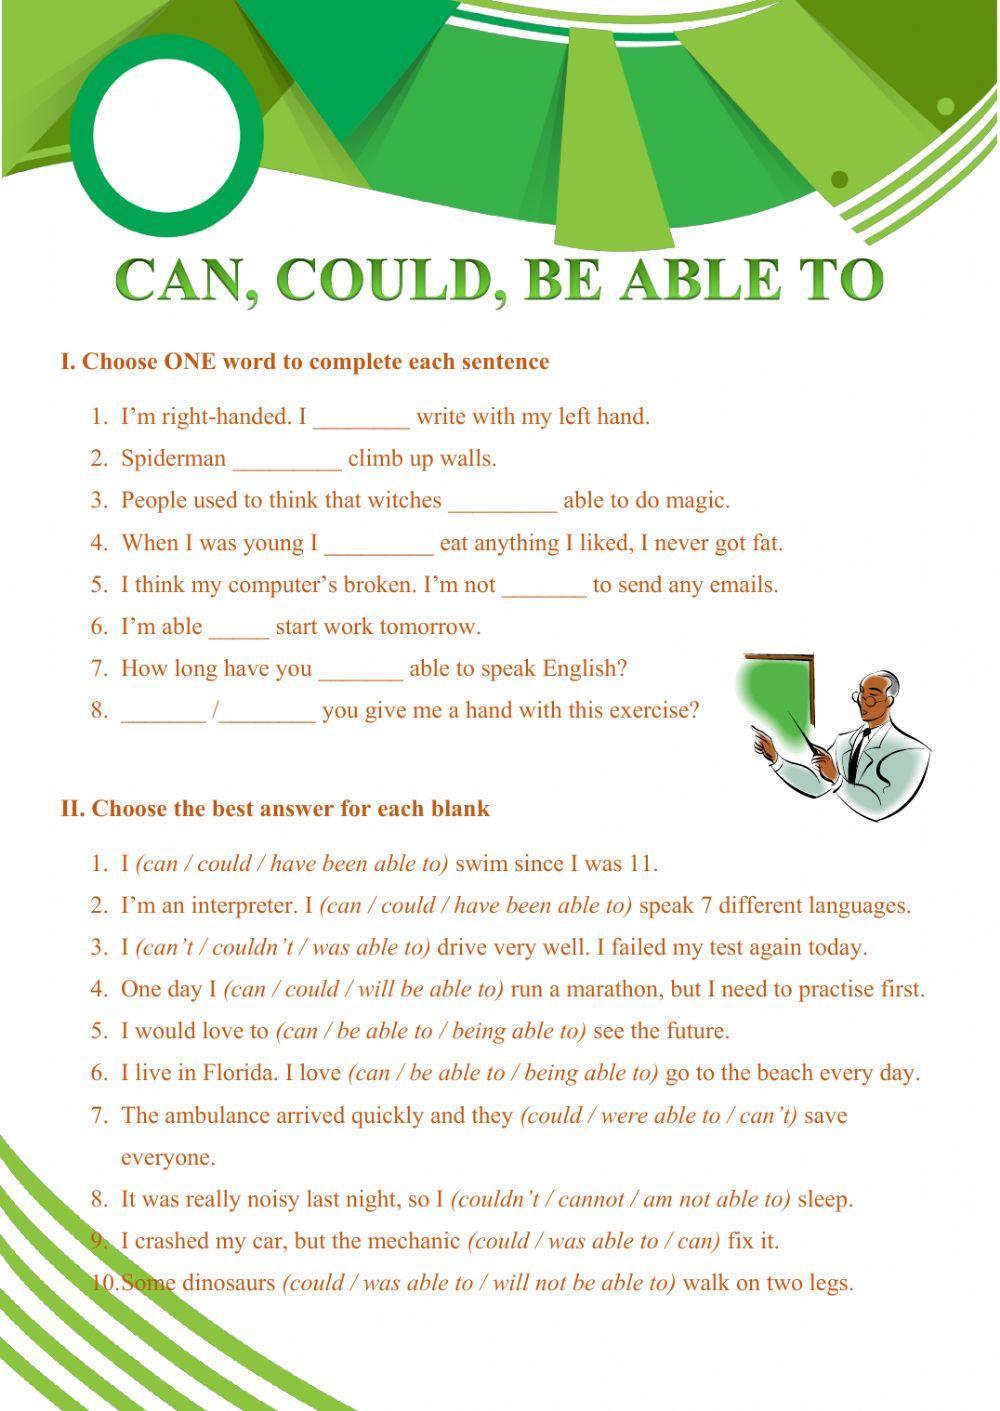 Can - could - be able to worksheet | Live Worksheets